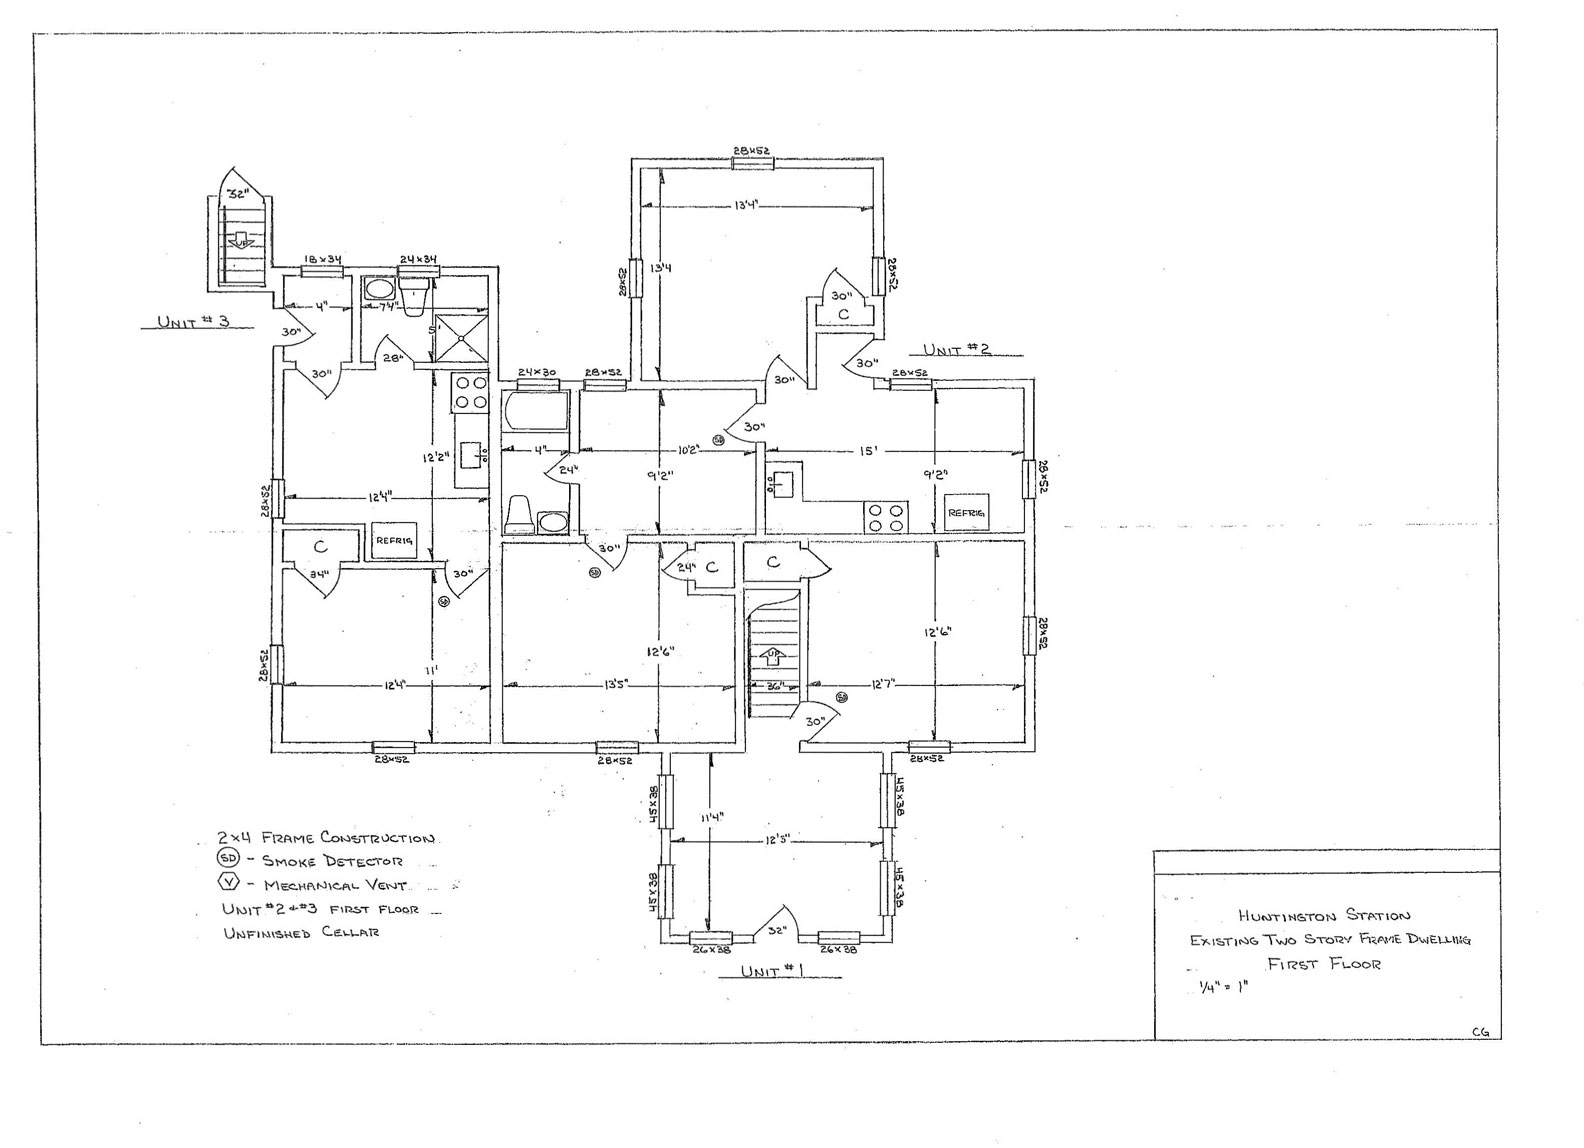 First Floor Plans of Legal 4 Family on One Prime Acre C-6 Zoning